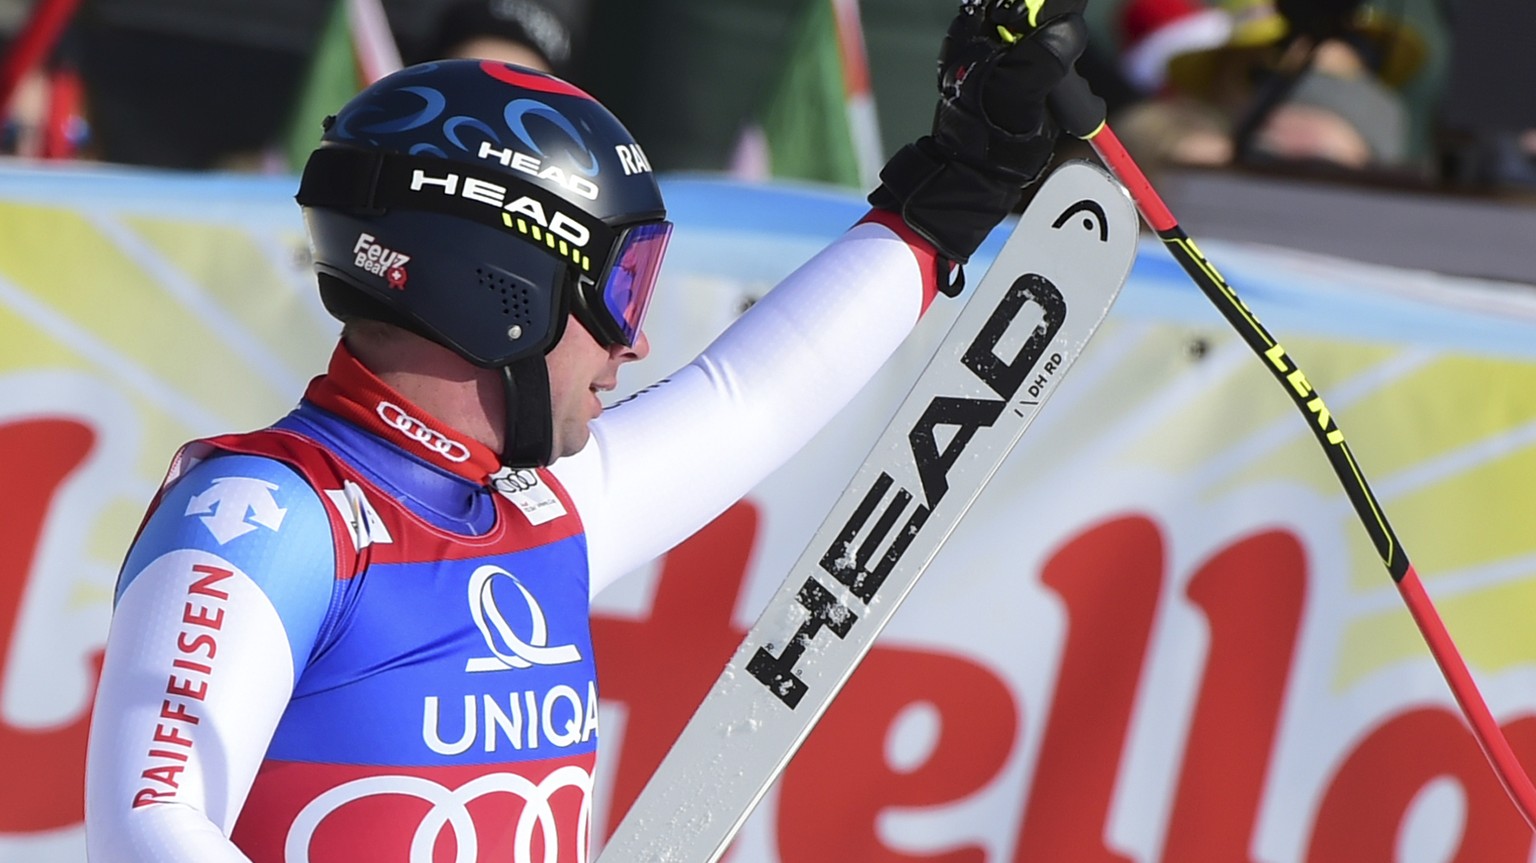 Switzerland&#039;s Beat Feuz reacts at finish line after completing an alpine ski, men&#039;s World Cup downhill, in Saalbach, Austria, Thursday, Feb. 13, 2020. (AP Photo/Marco Tacca)